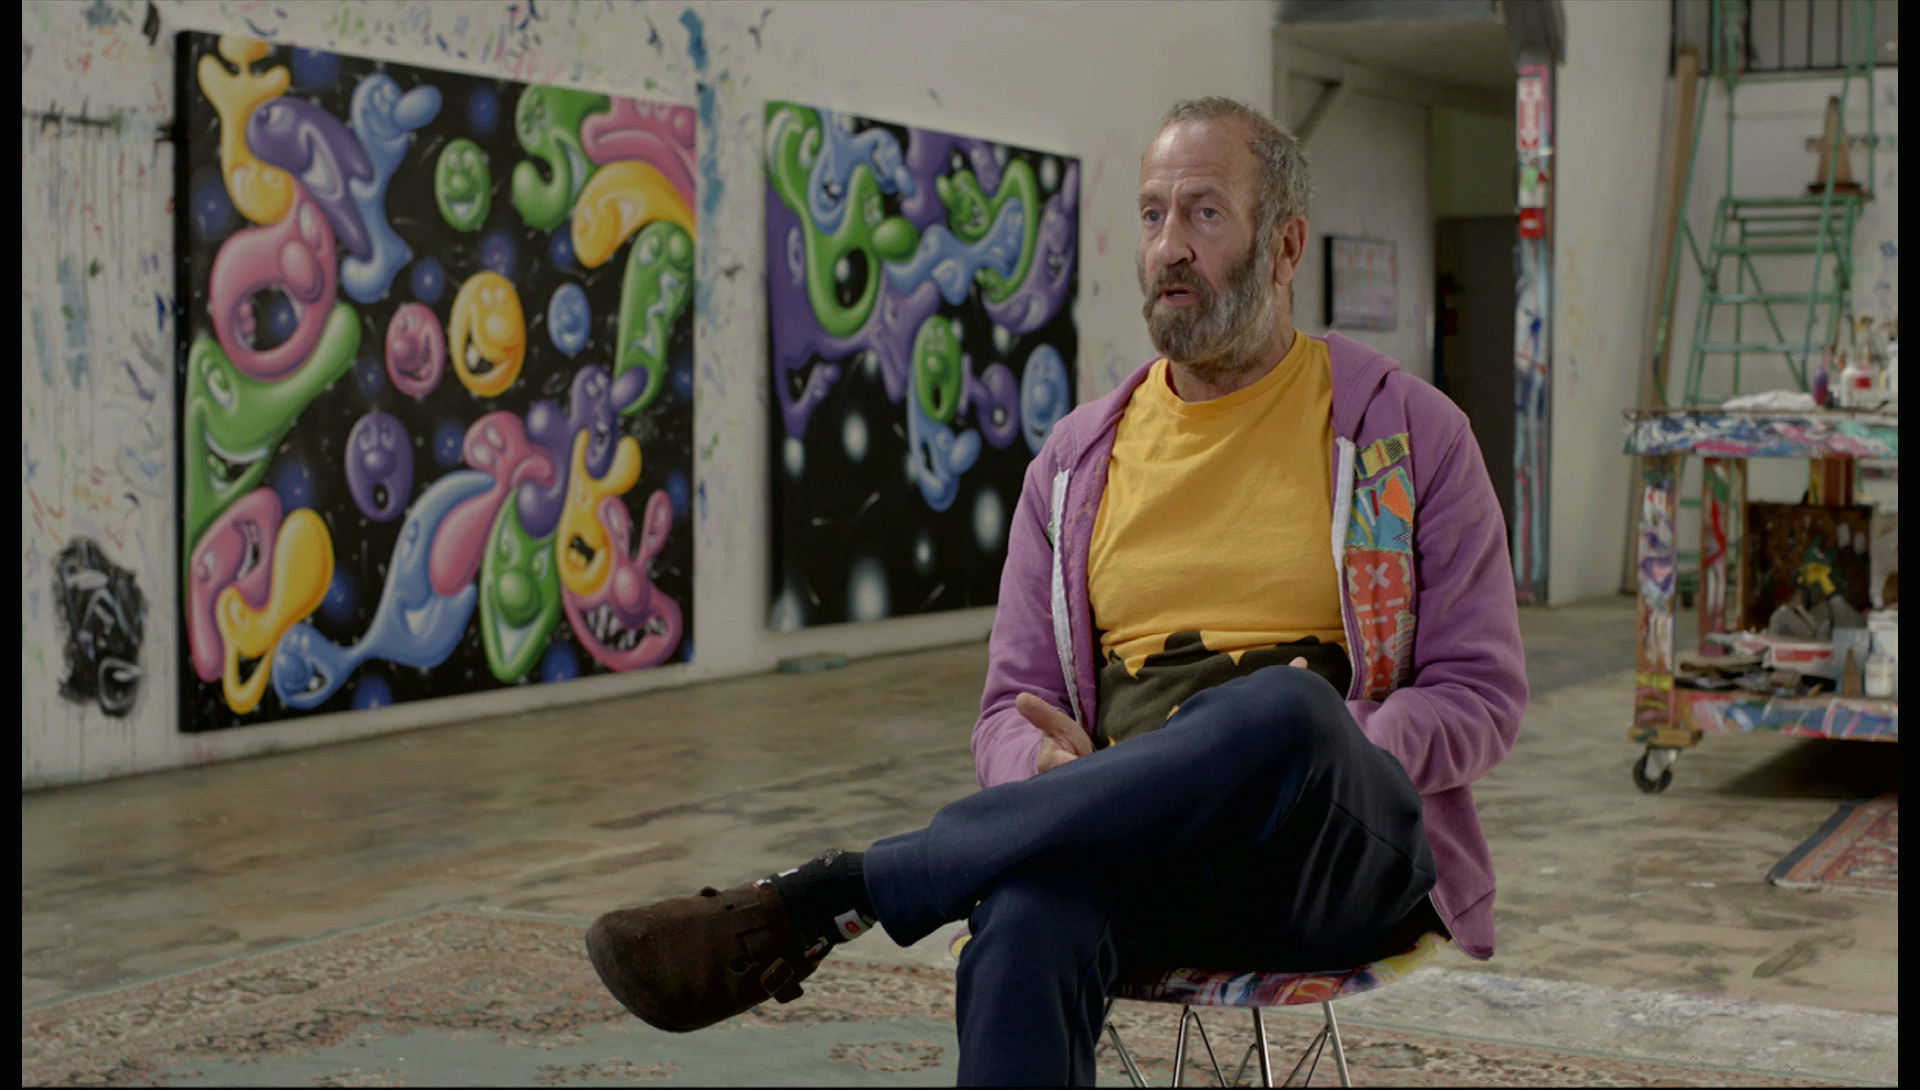 A man sitting in a chair, being interviewed in an art gallery.